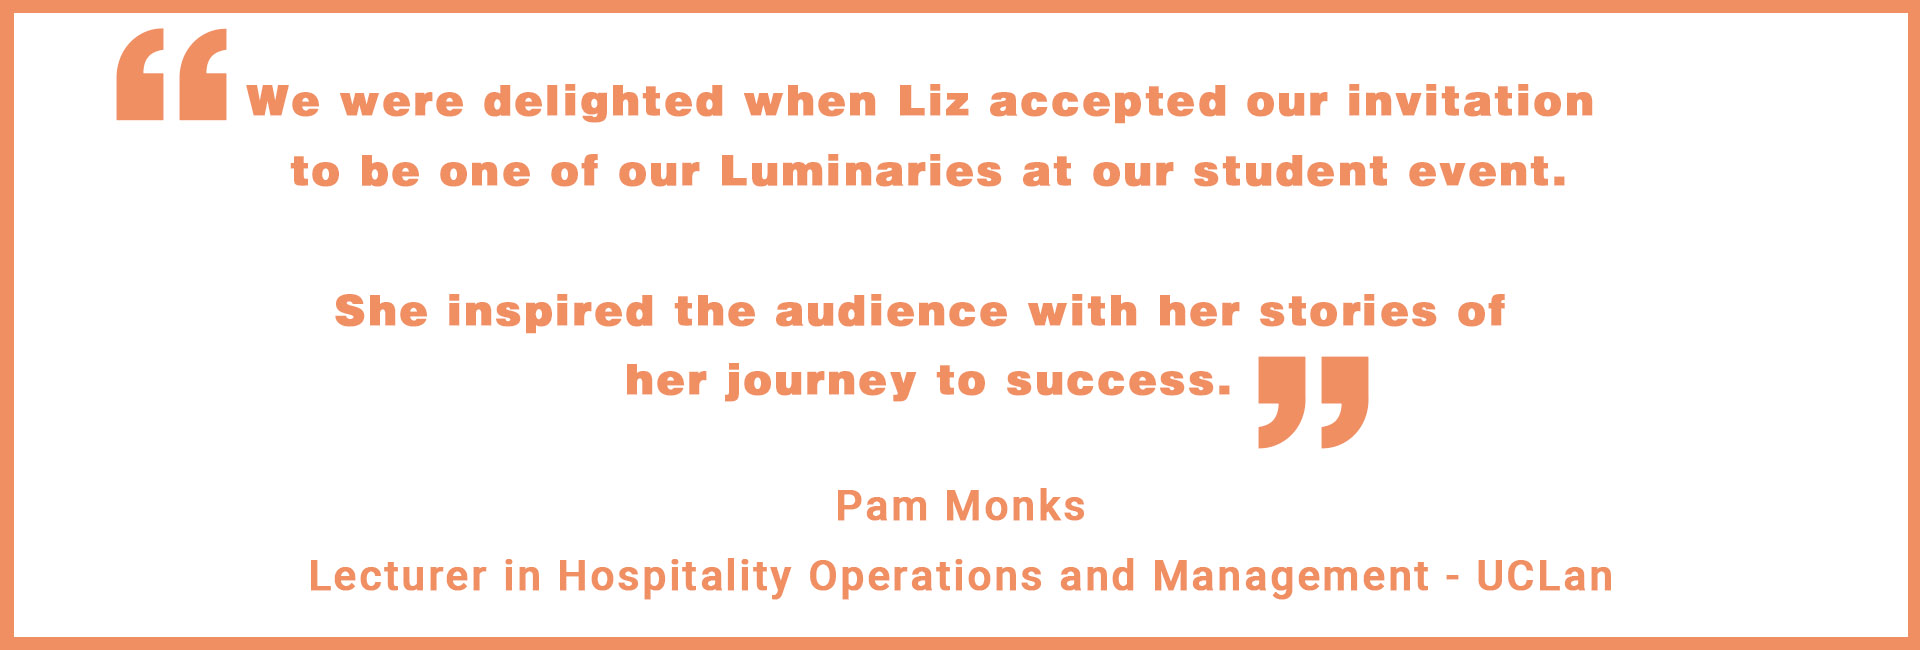 Quote Pam Monks Lecturer in Hospitality Operations and Management UCLan